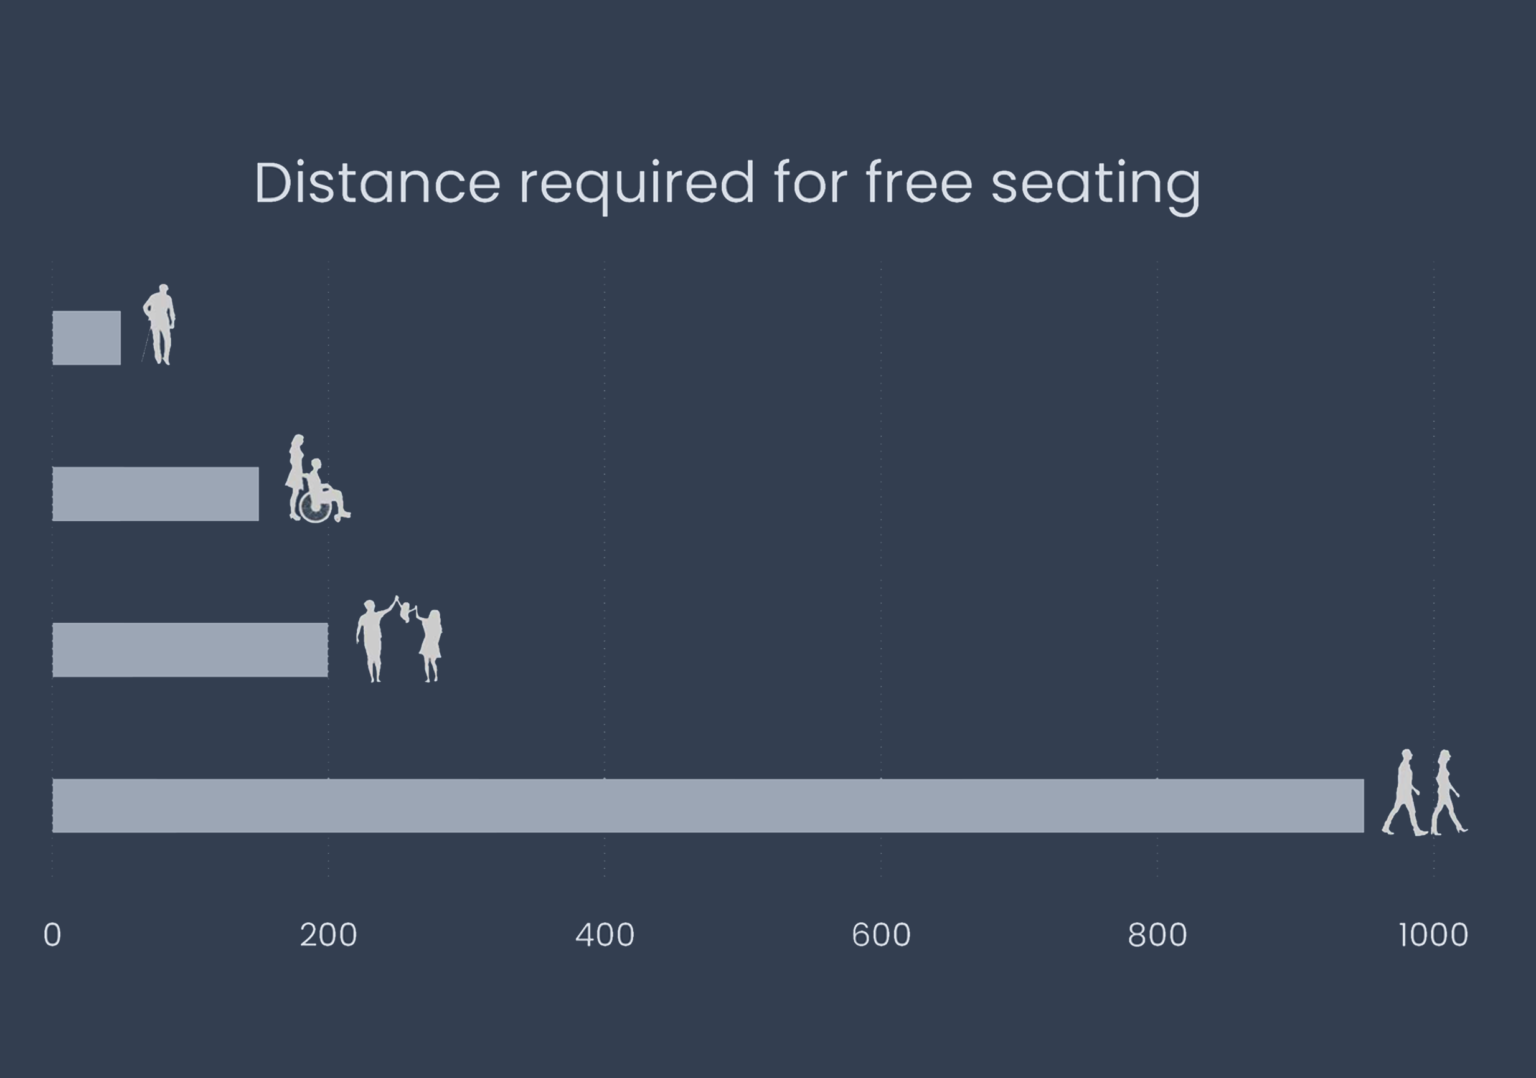 Free seating distance requirements